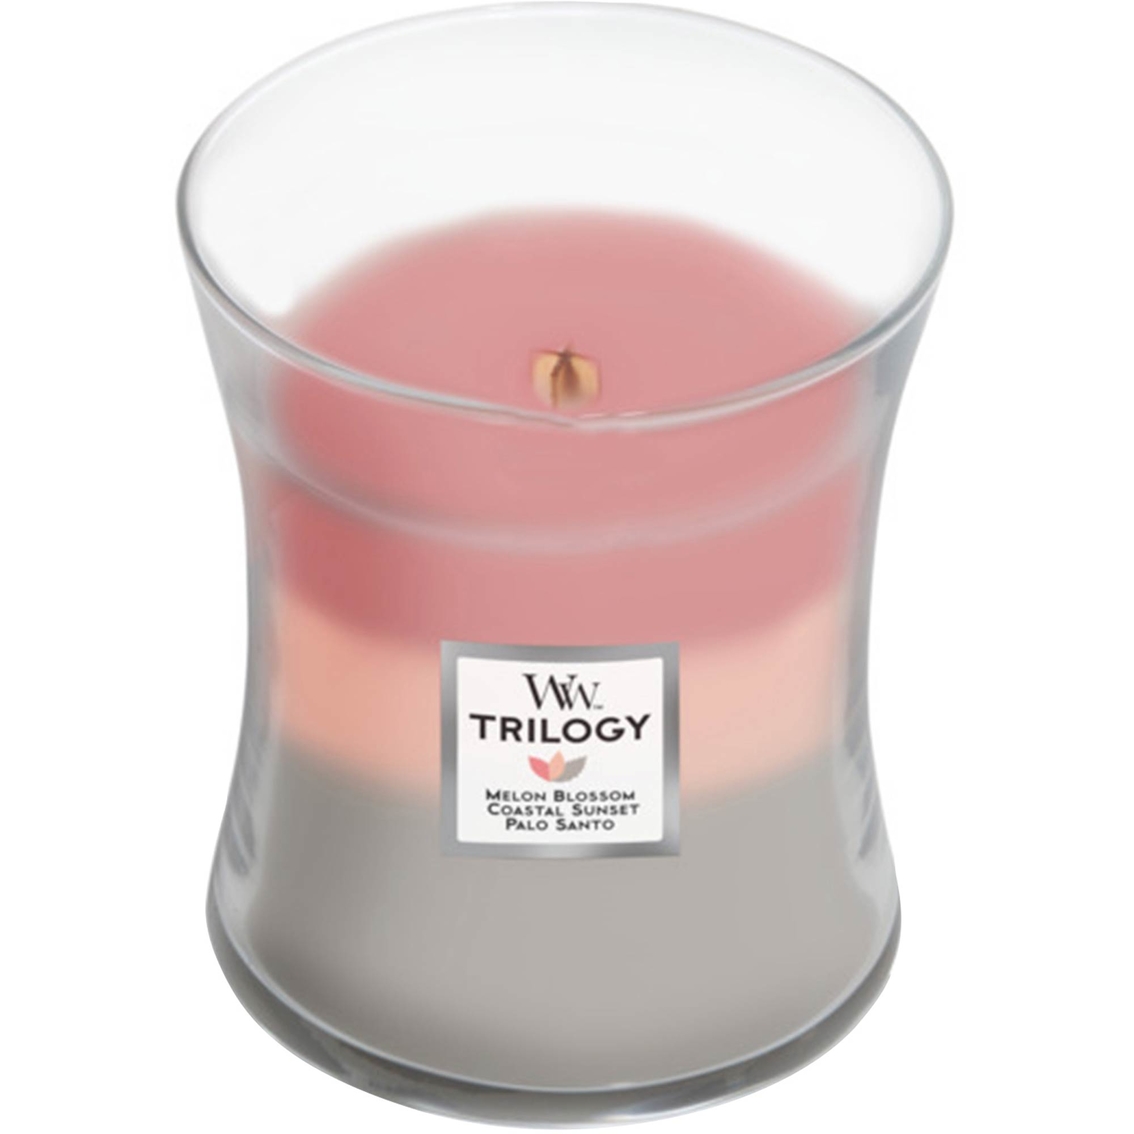 Woodwick Trilogy Candle, Amethyst Sky - 1 candle, 16 oz